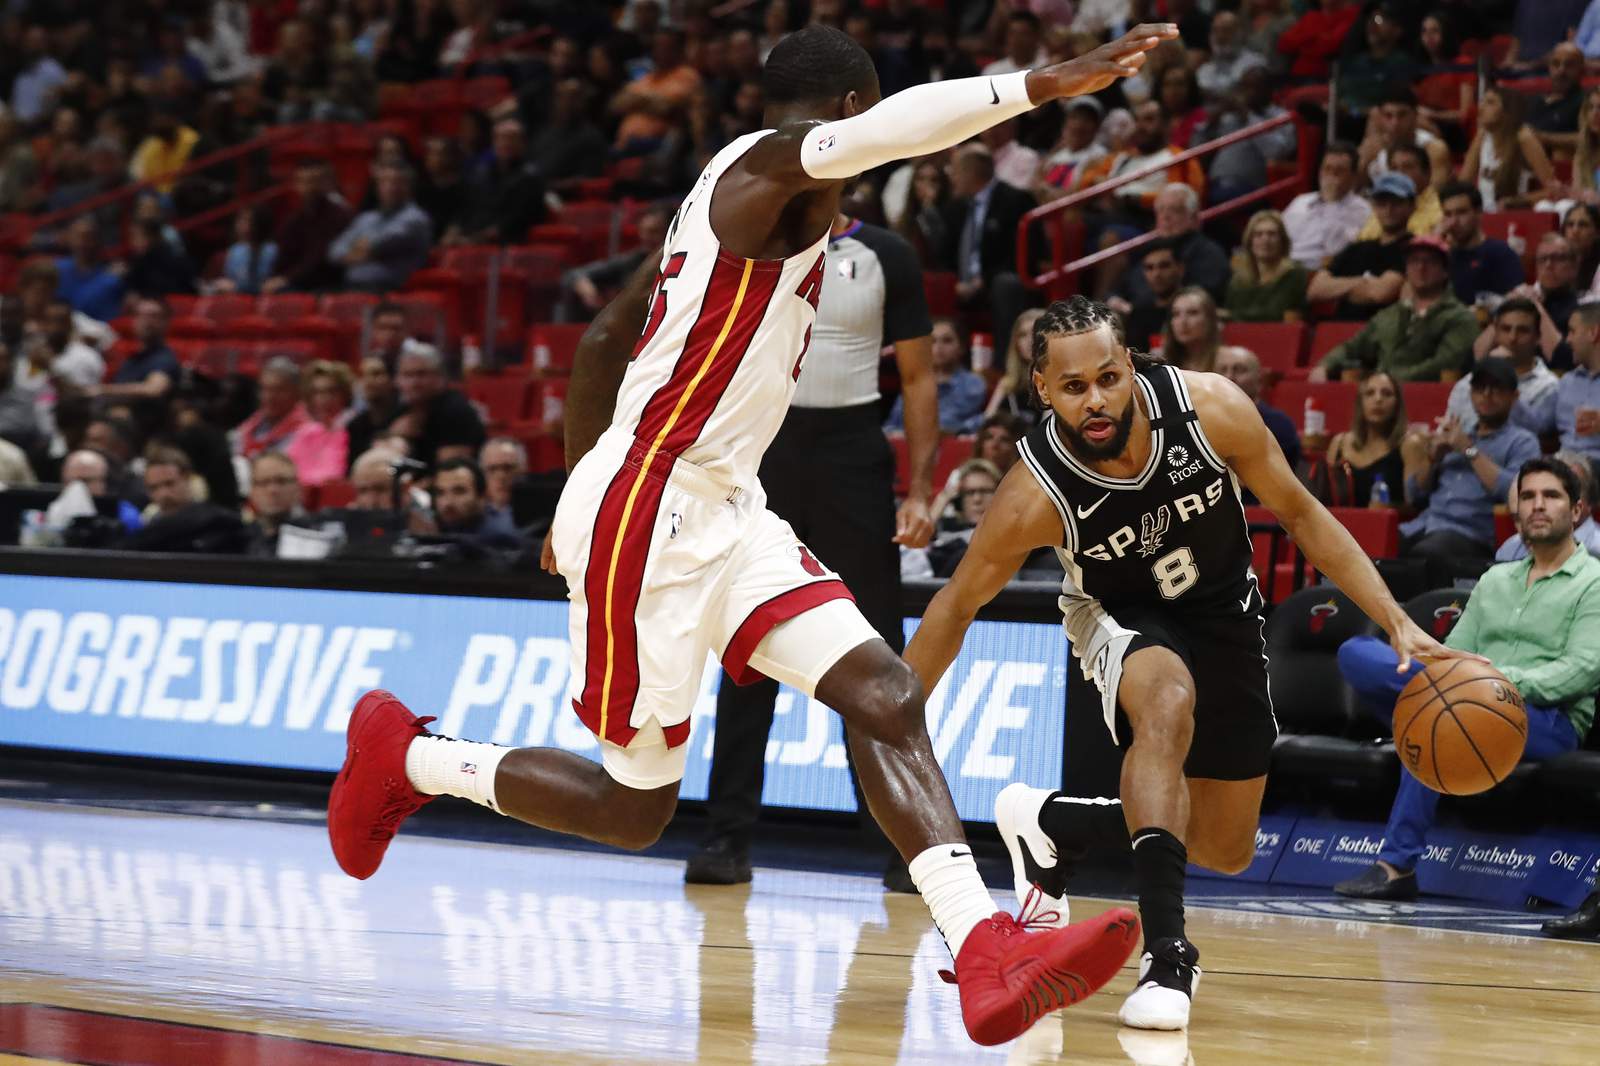 Patty Mills aims to raise awareness of Indigenous cultures